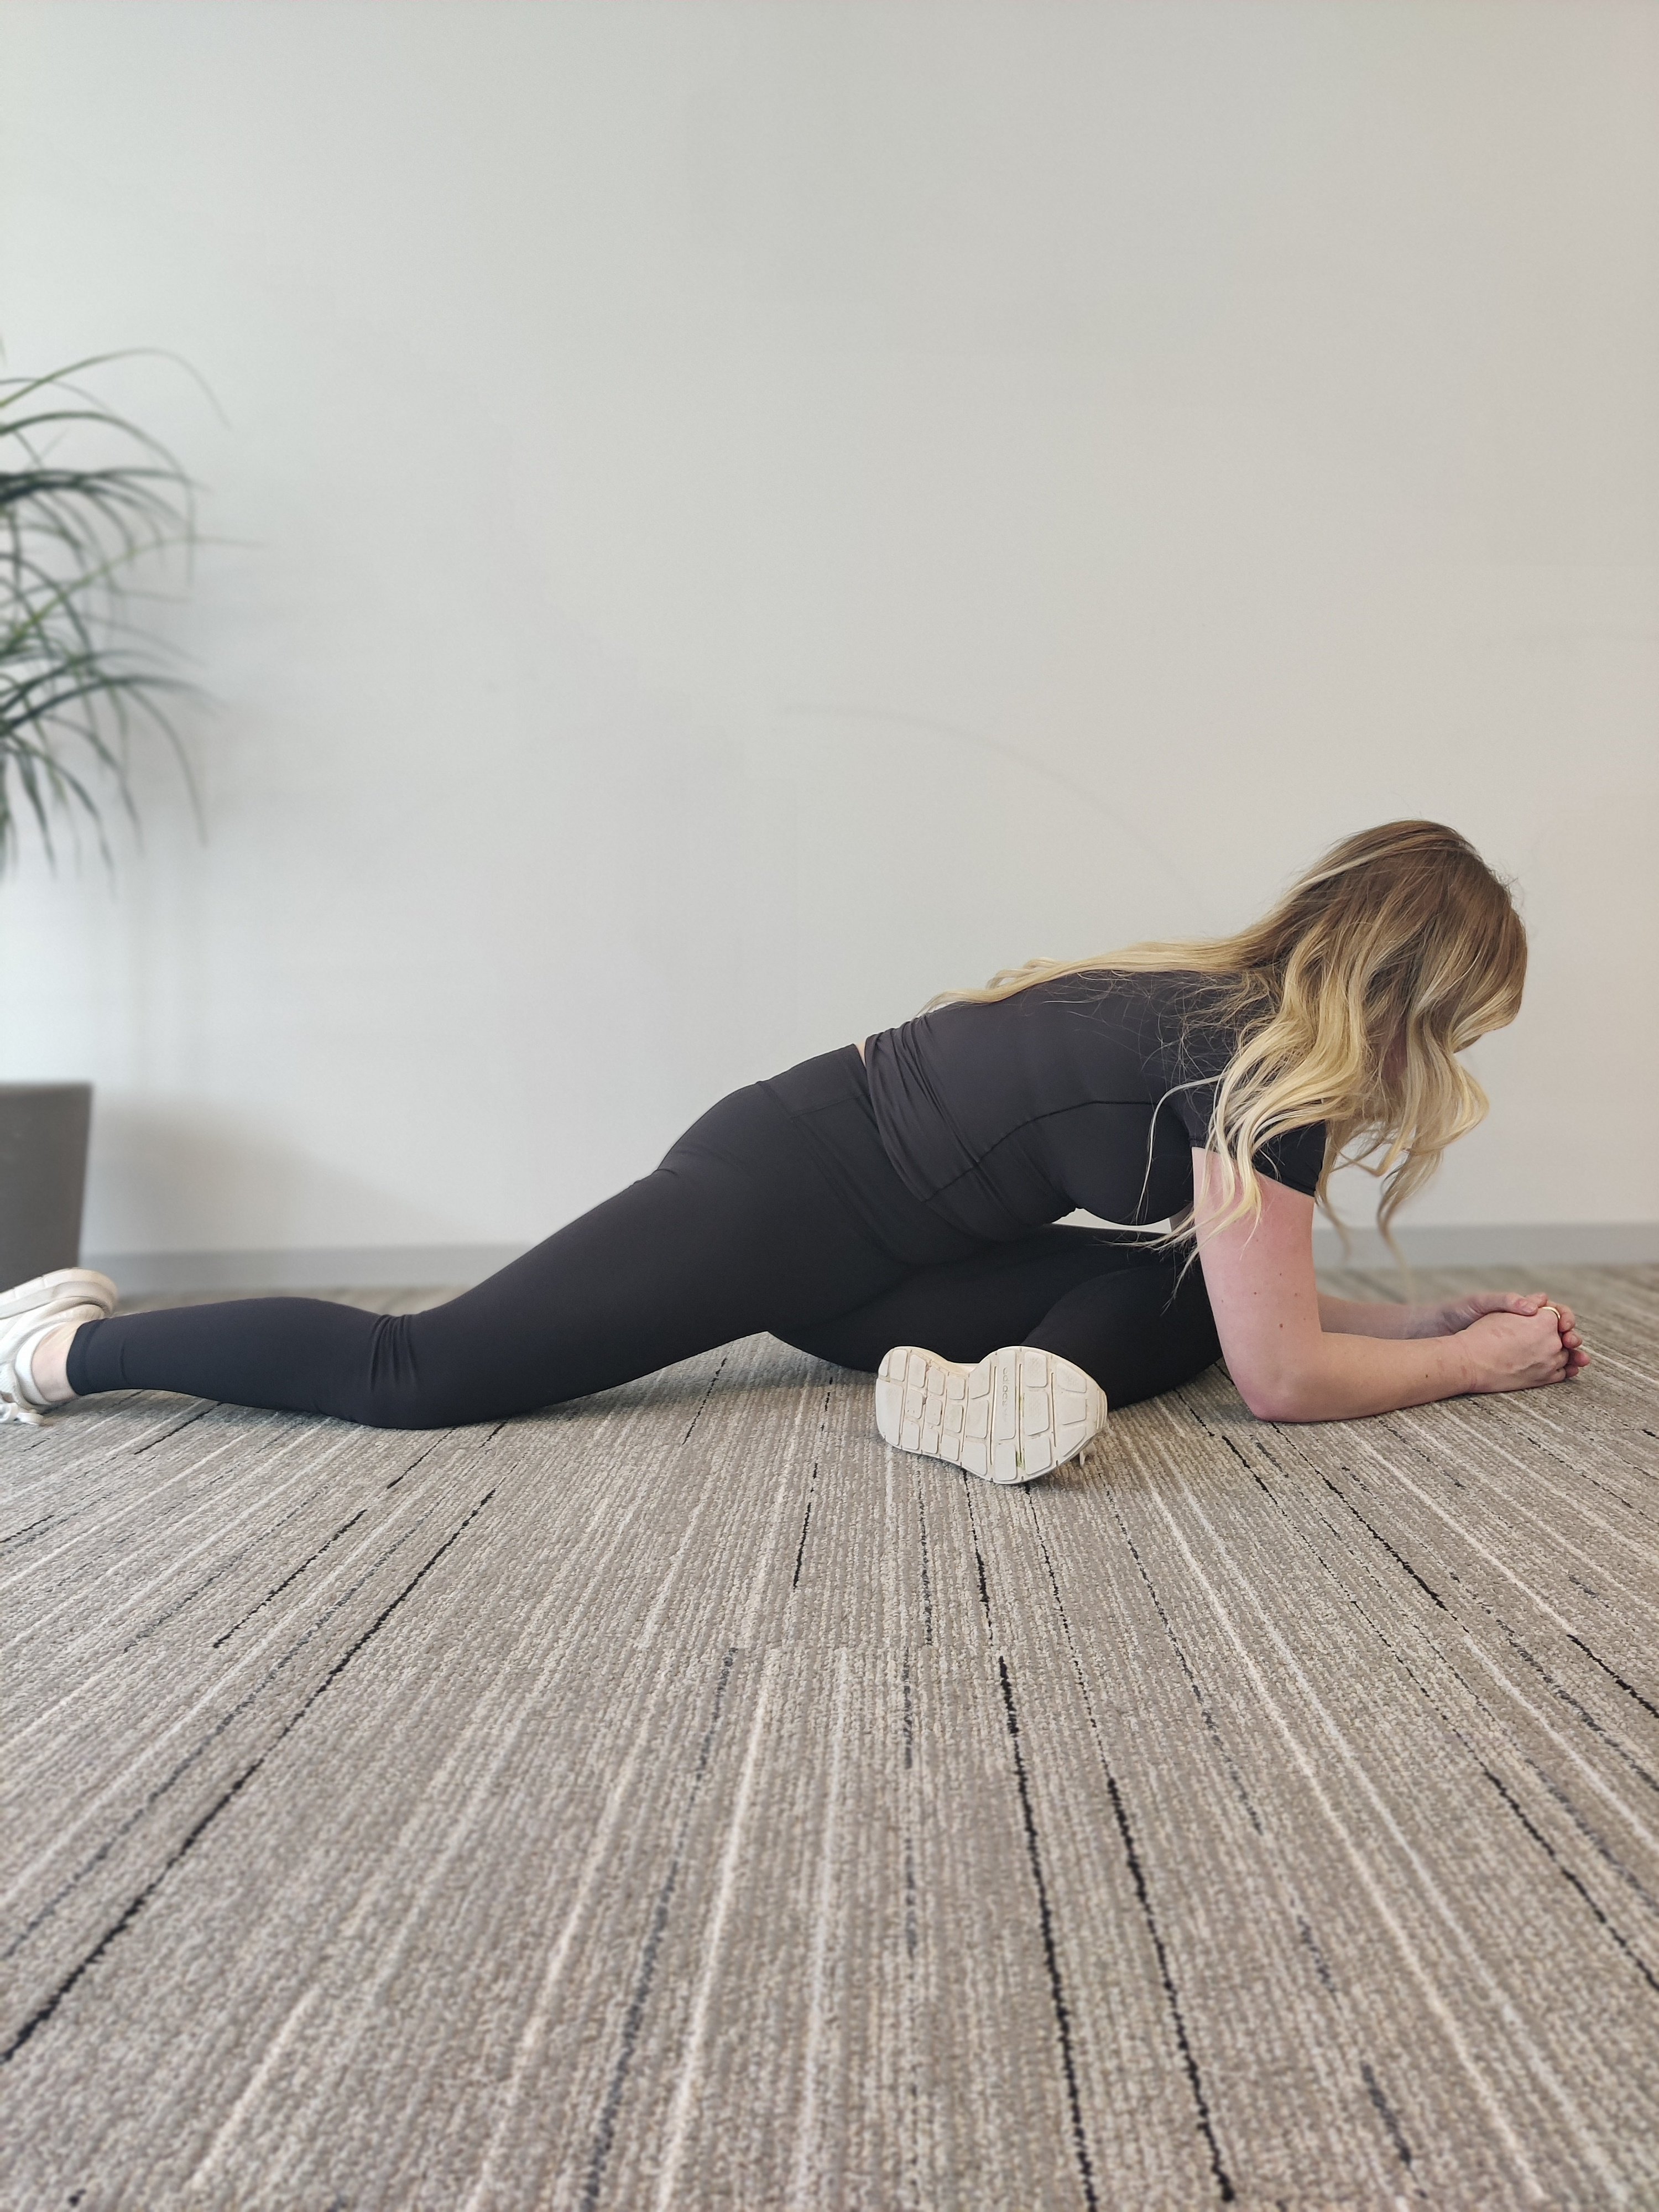 pigeon stretch for better flexibility